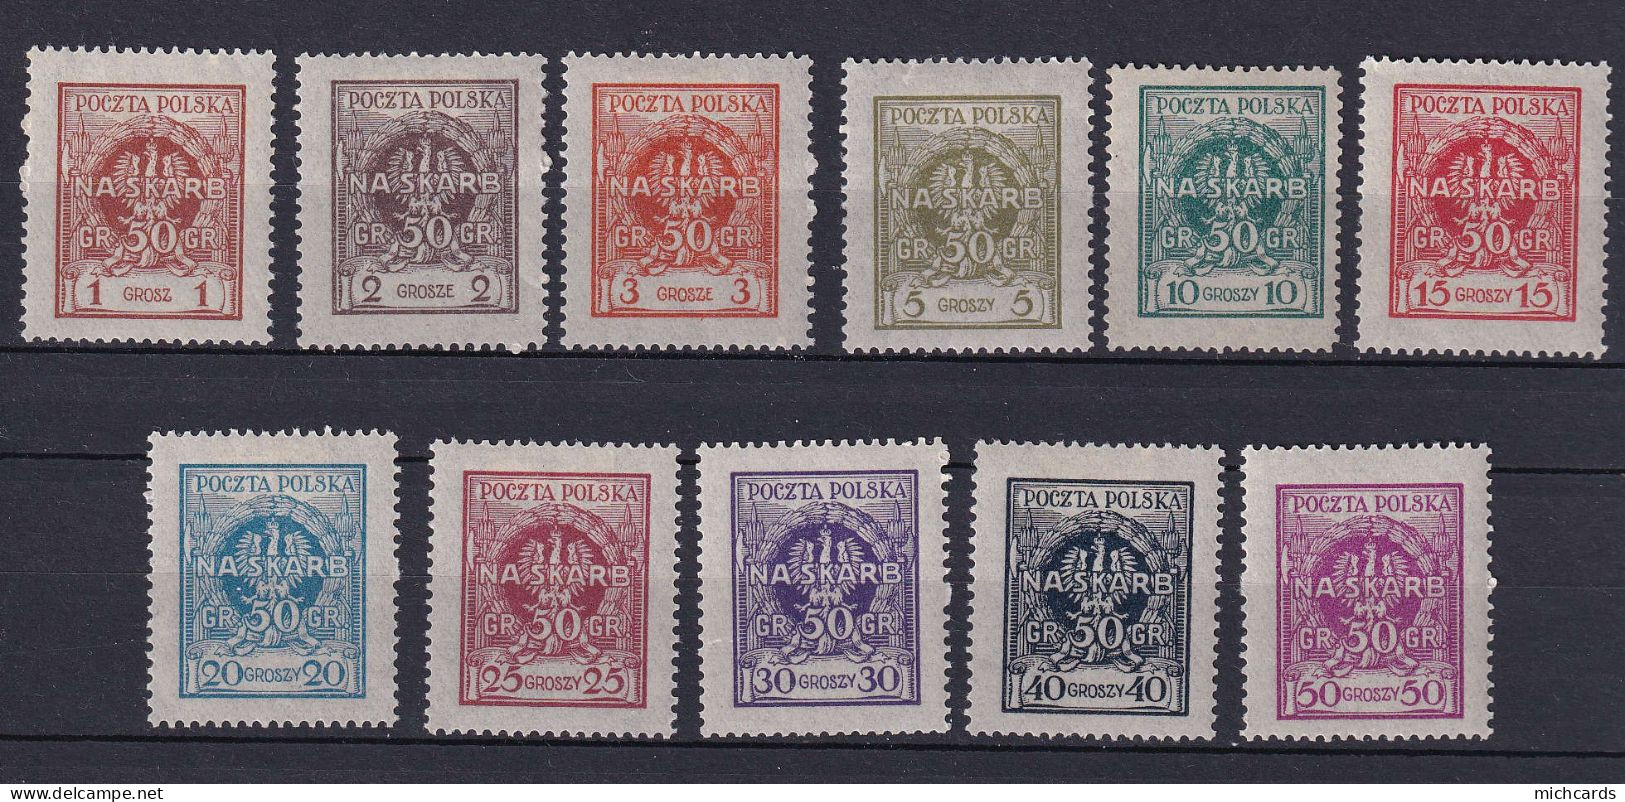 POLOGNE 1925 - Y&T 299/309 - Surtaxe Profit Tresor NatIonal - Neuf * (MLH) Avec Trace De Charniere - Unused Stamps